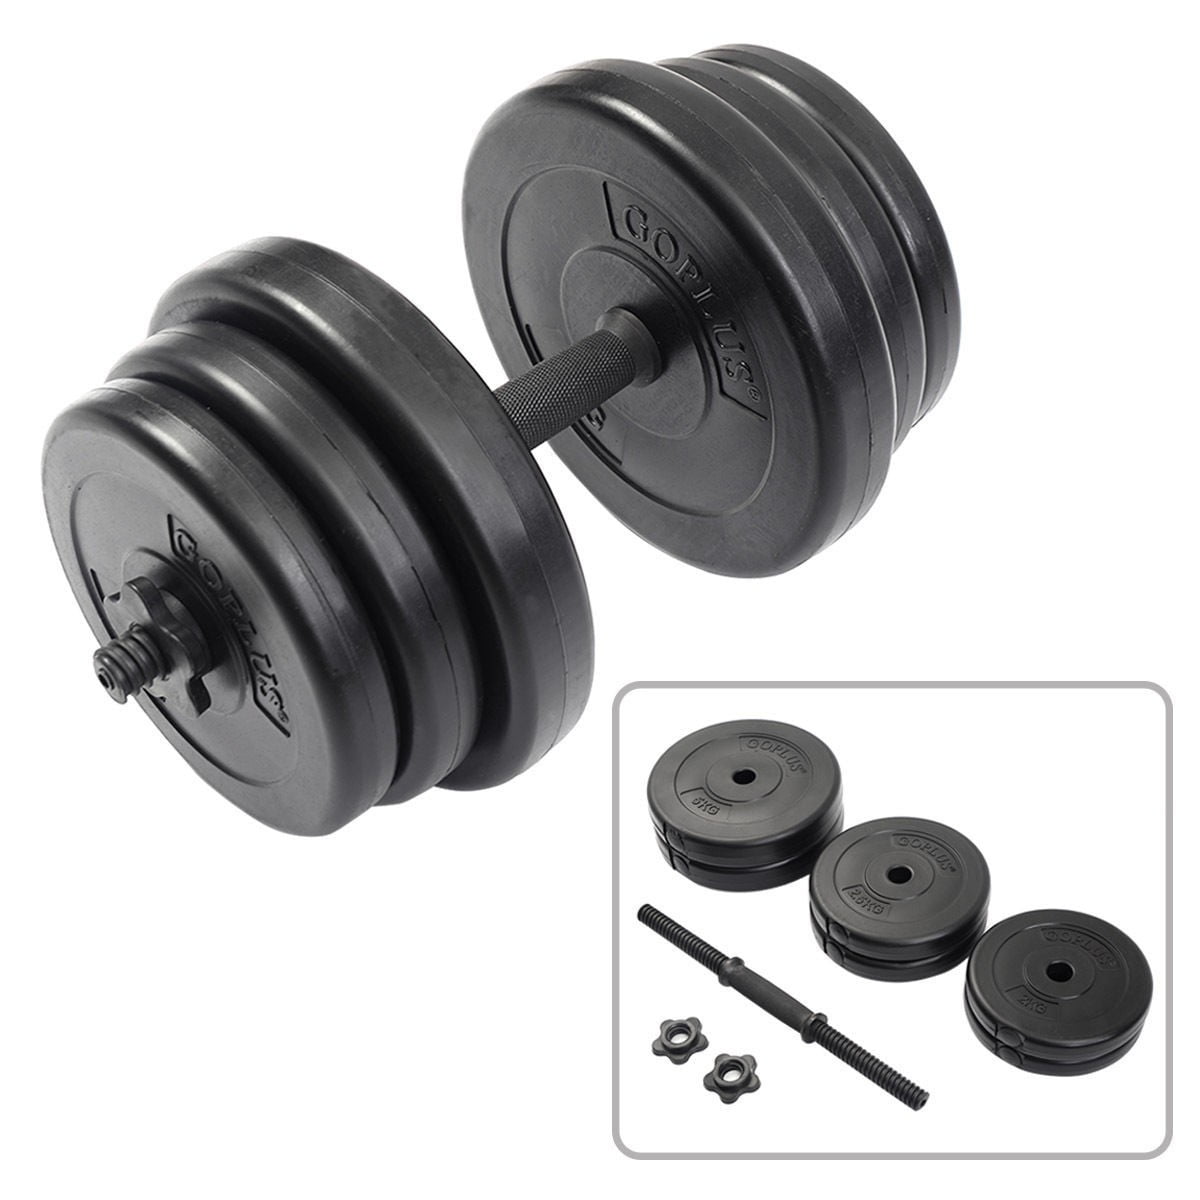 44 LB Weight Dumbbell Set Adjustable Cap Gym Home Barbell Plates Body Workout US 